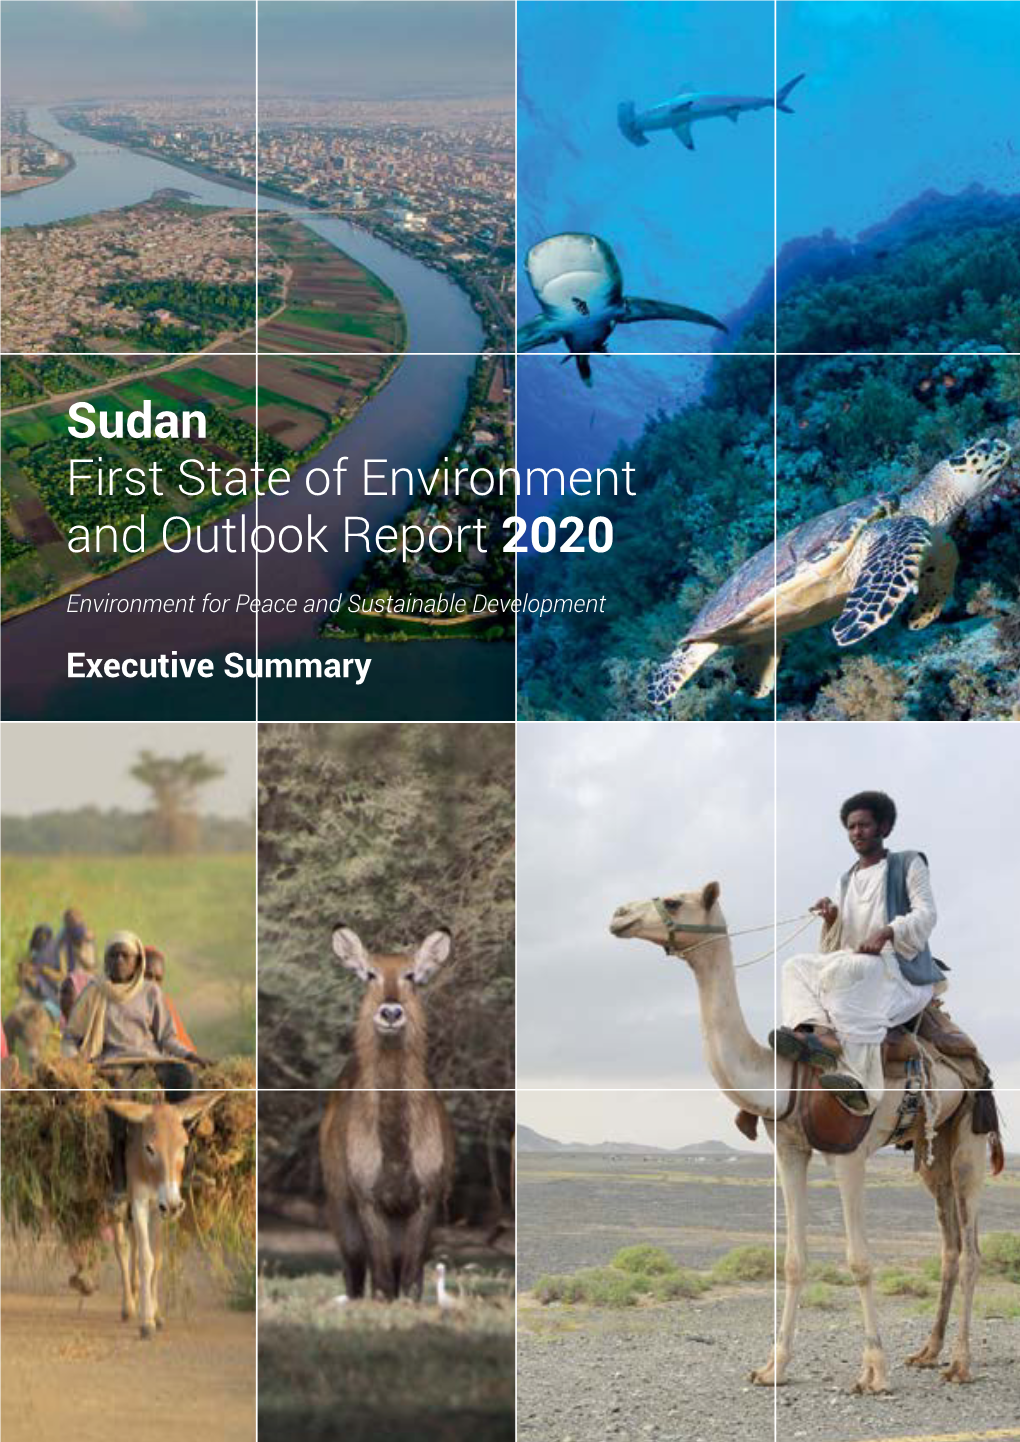 Sudan First State of Environment and Outlook Report 2020